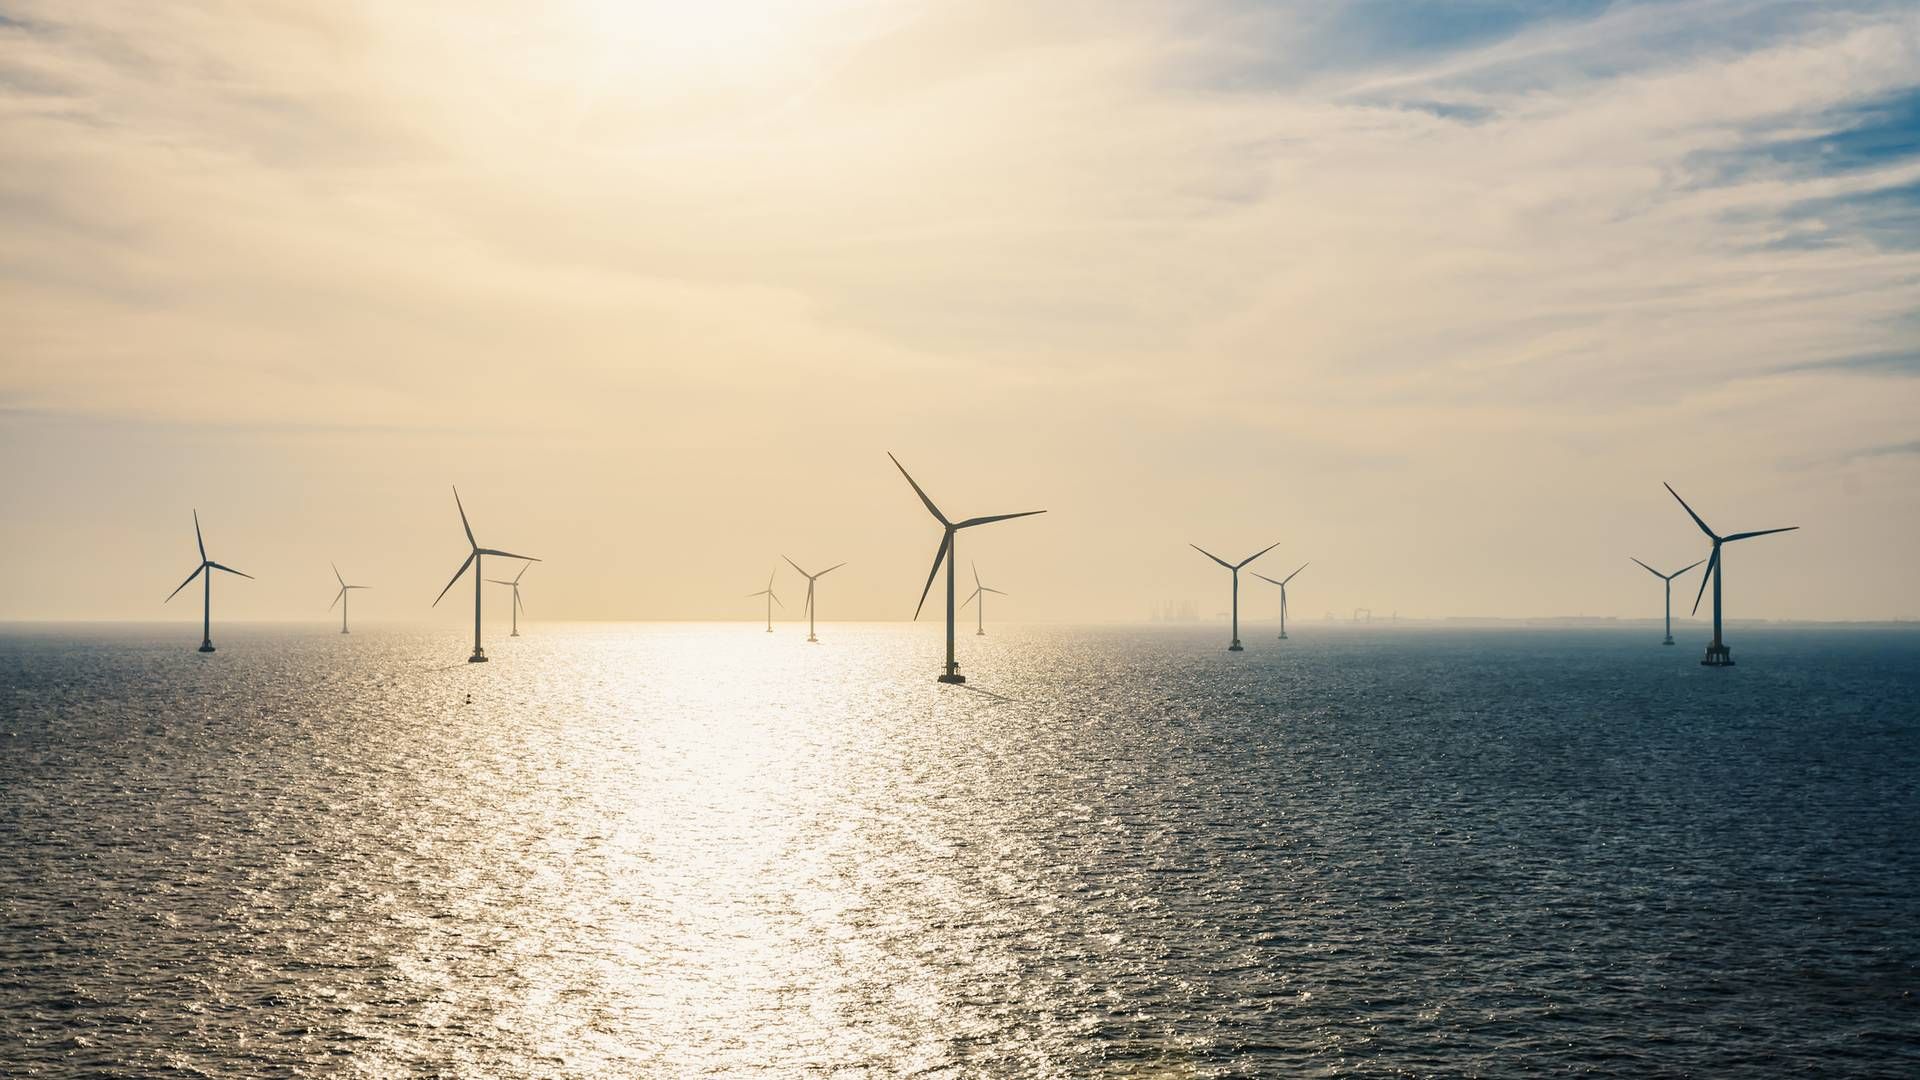 The Västvind project will be located near Gothenburg and is expected to have a capacity of 1GW with an annual production of 4-4.5 TWh | Photo: Eolus Vind